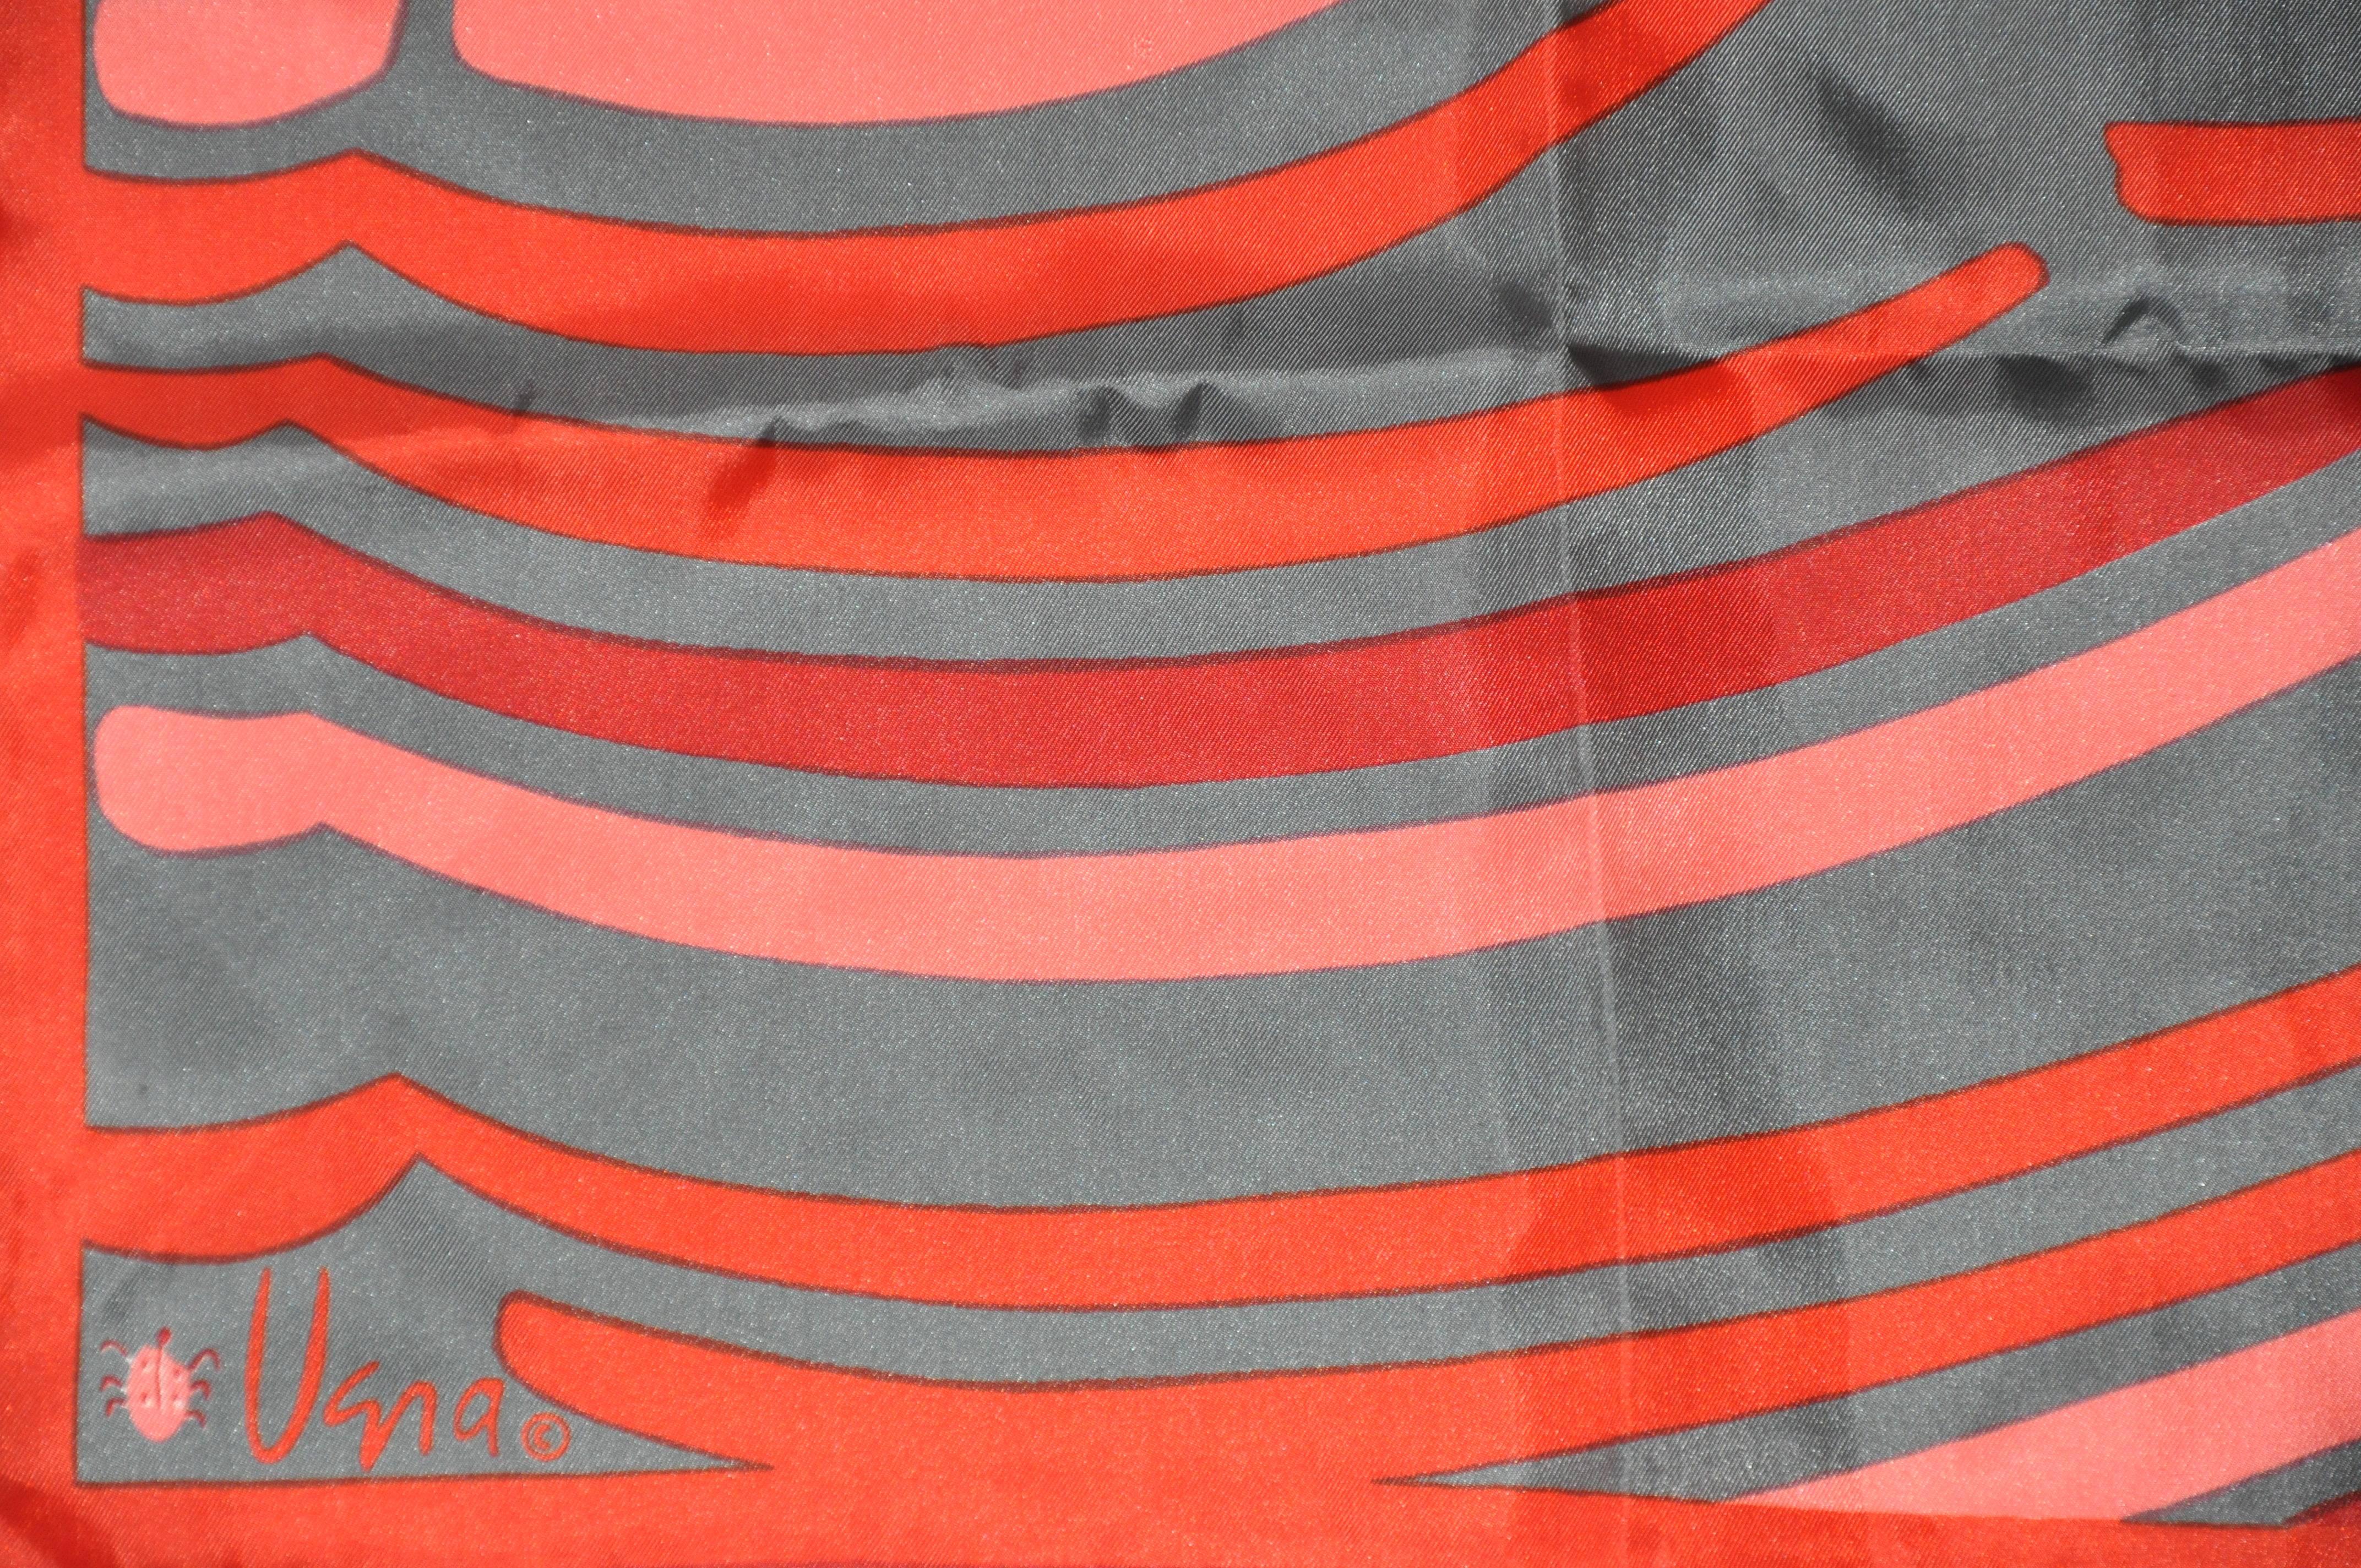        Vera wonderful shades of rose and gray multi-abstract stripe scarf of polyester accented with rolled edges, measures 14 inches by 43 inches.